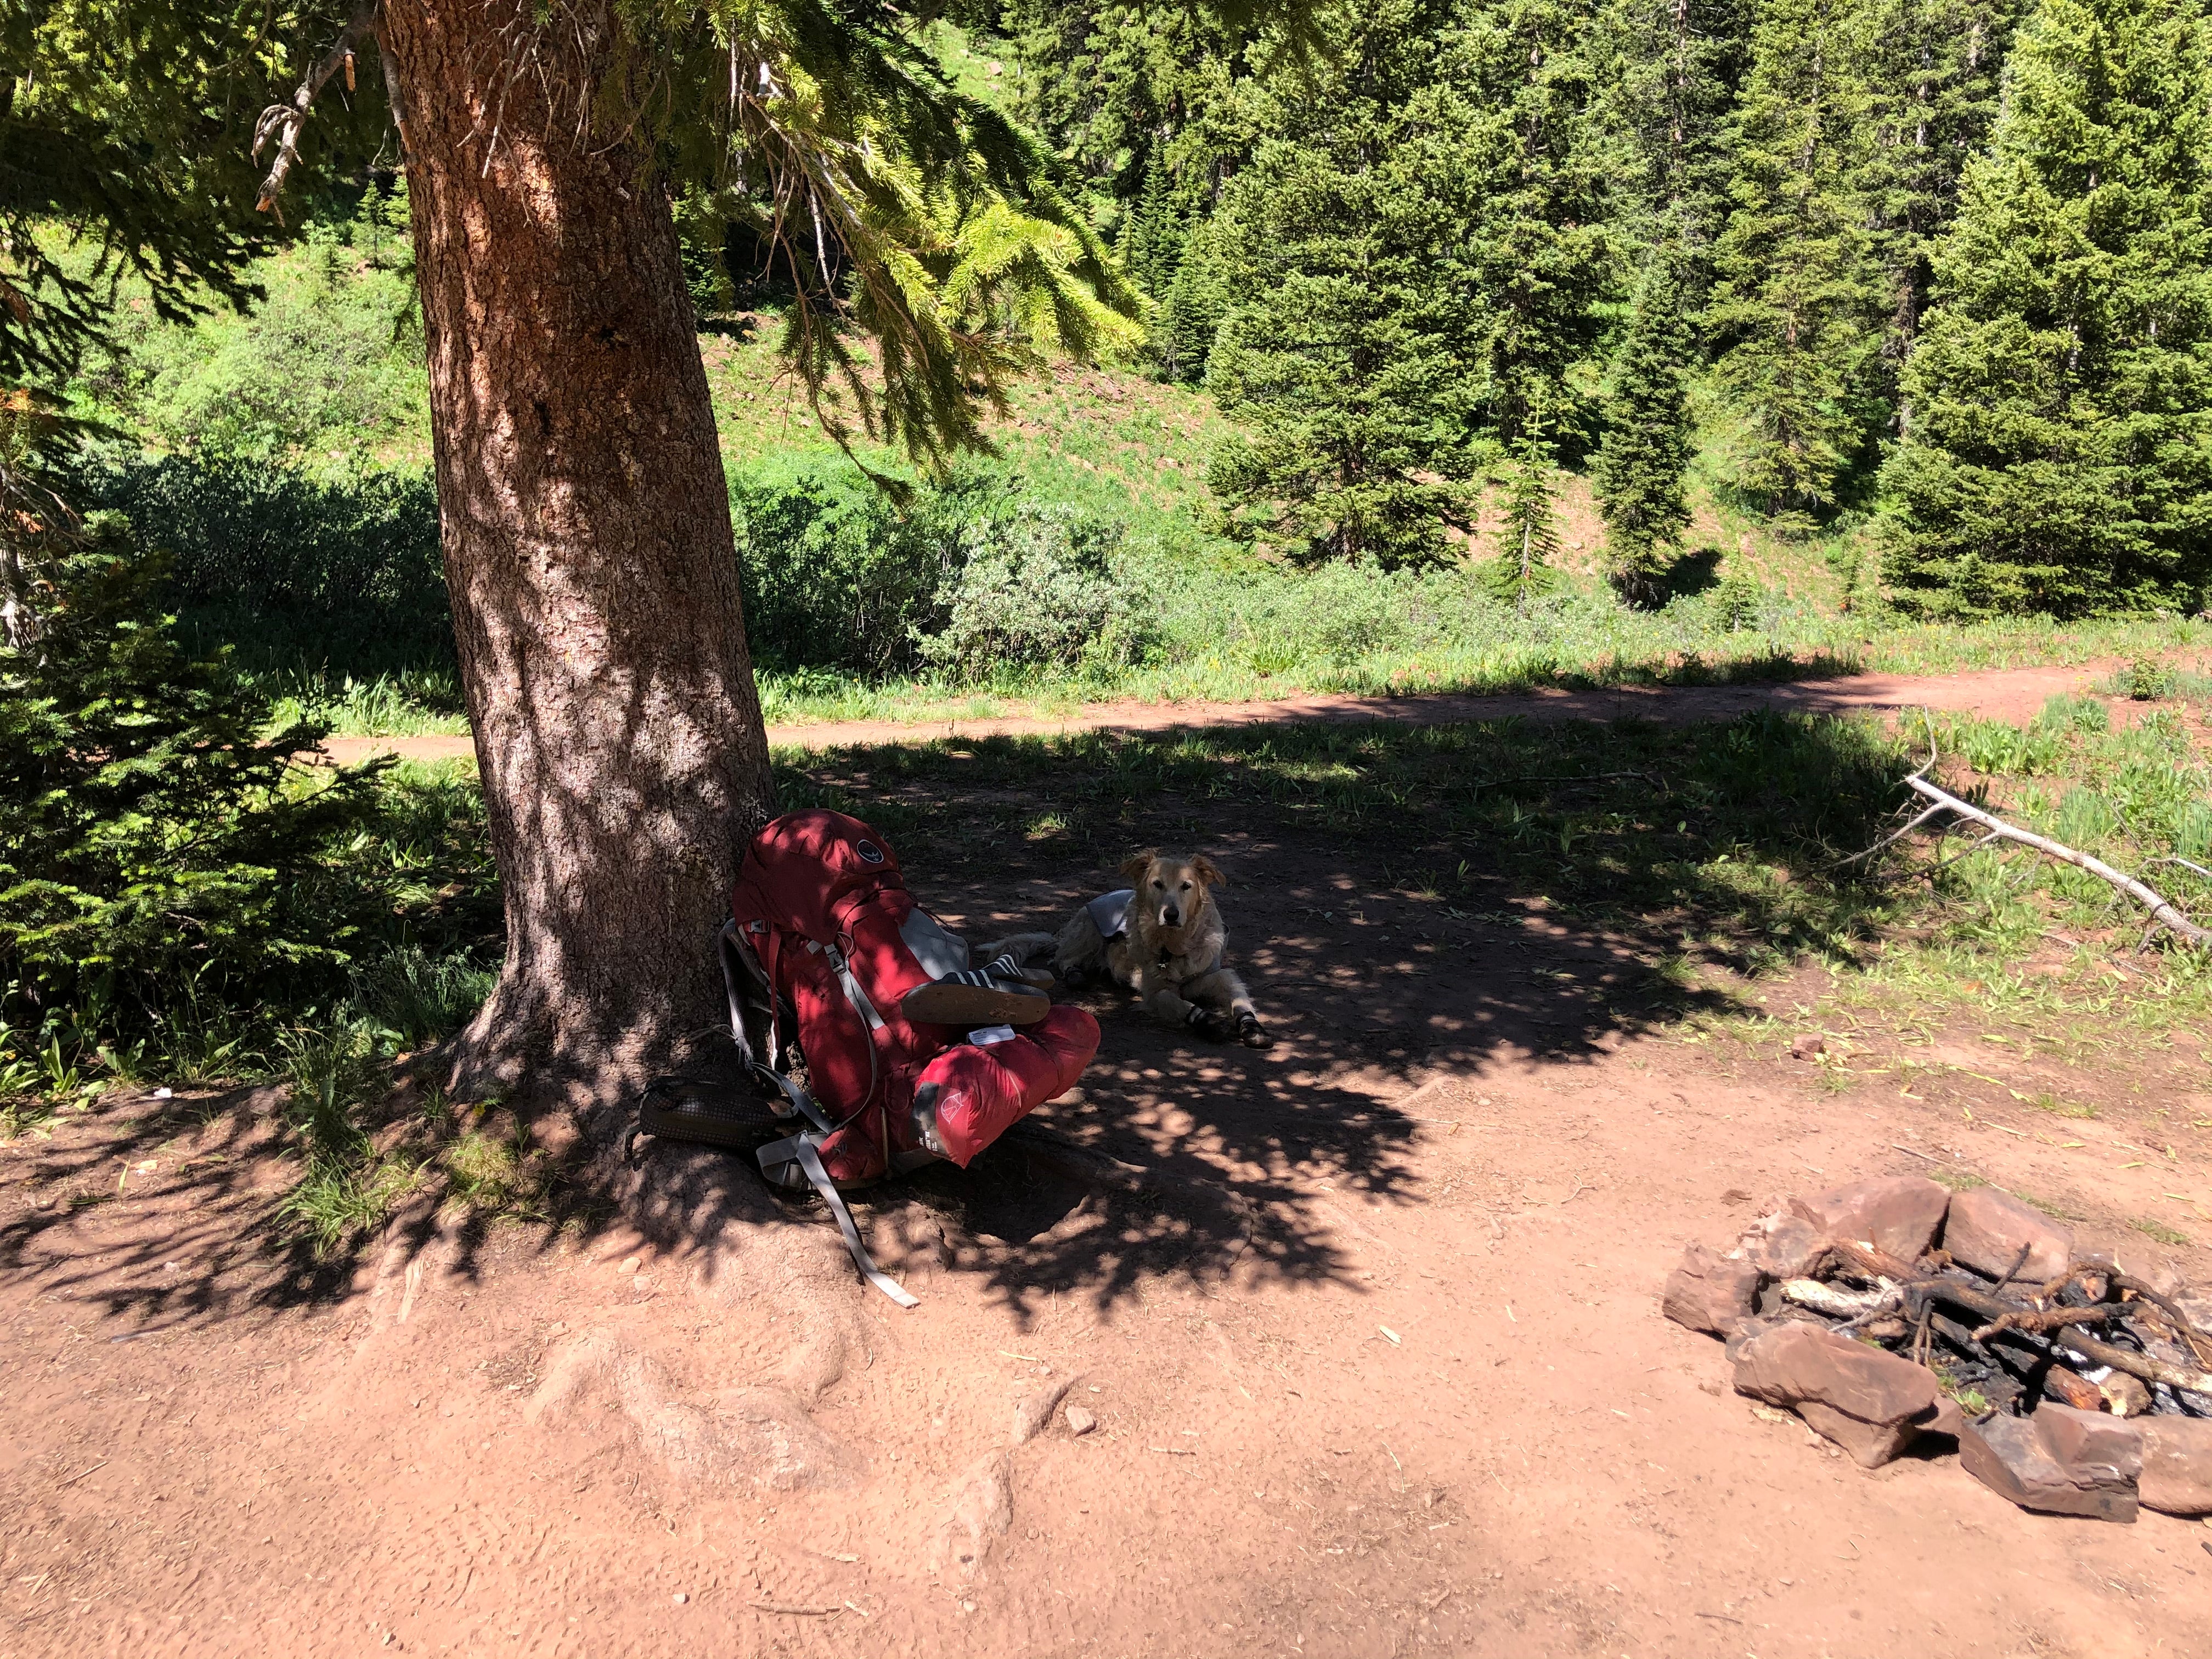 Camper submitted image from Maroon Bells-Snowmass Wilderness Dispersed Camping - 5